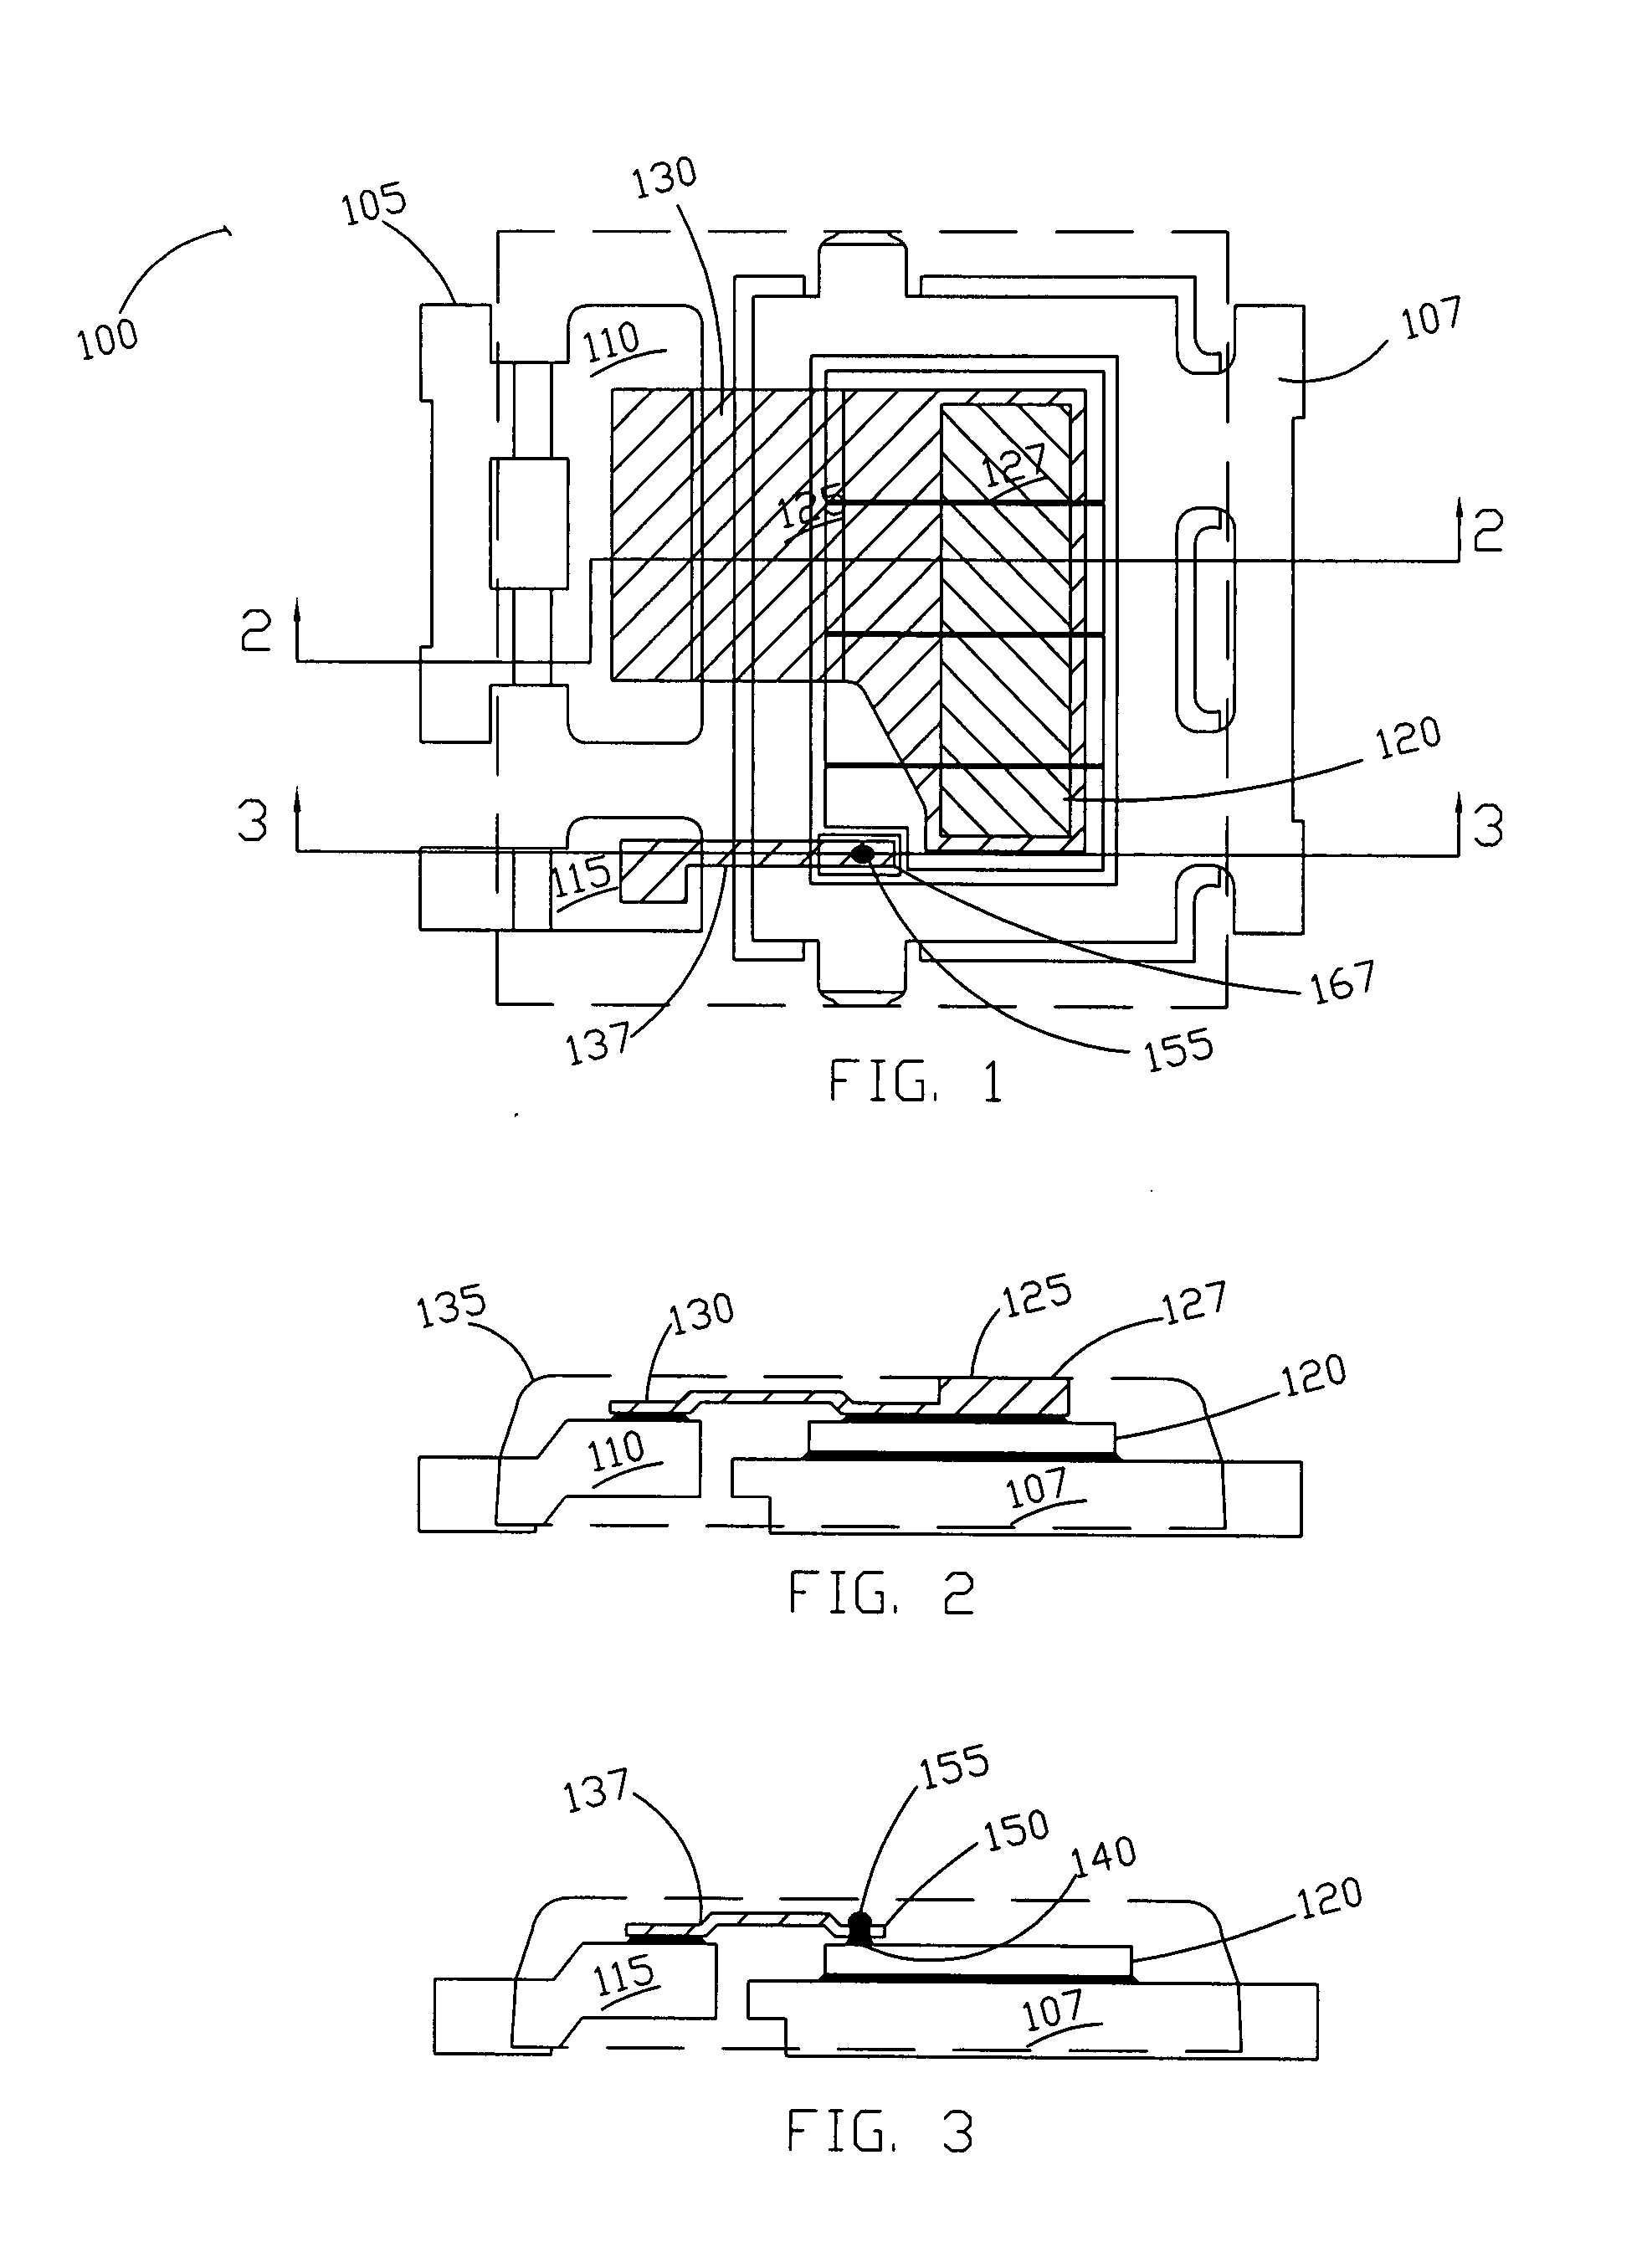 Semiconductor package having dimpled plate interconnections